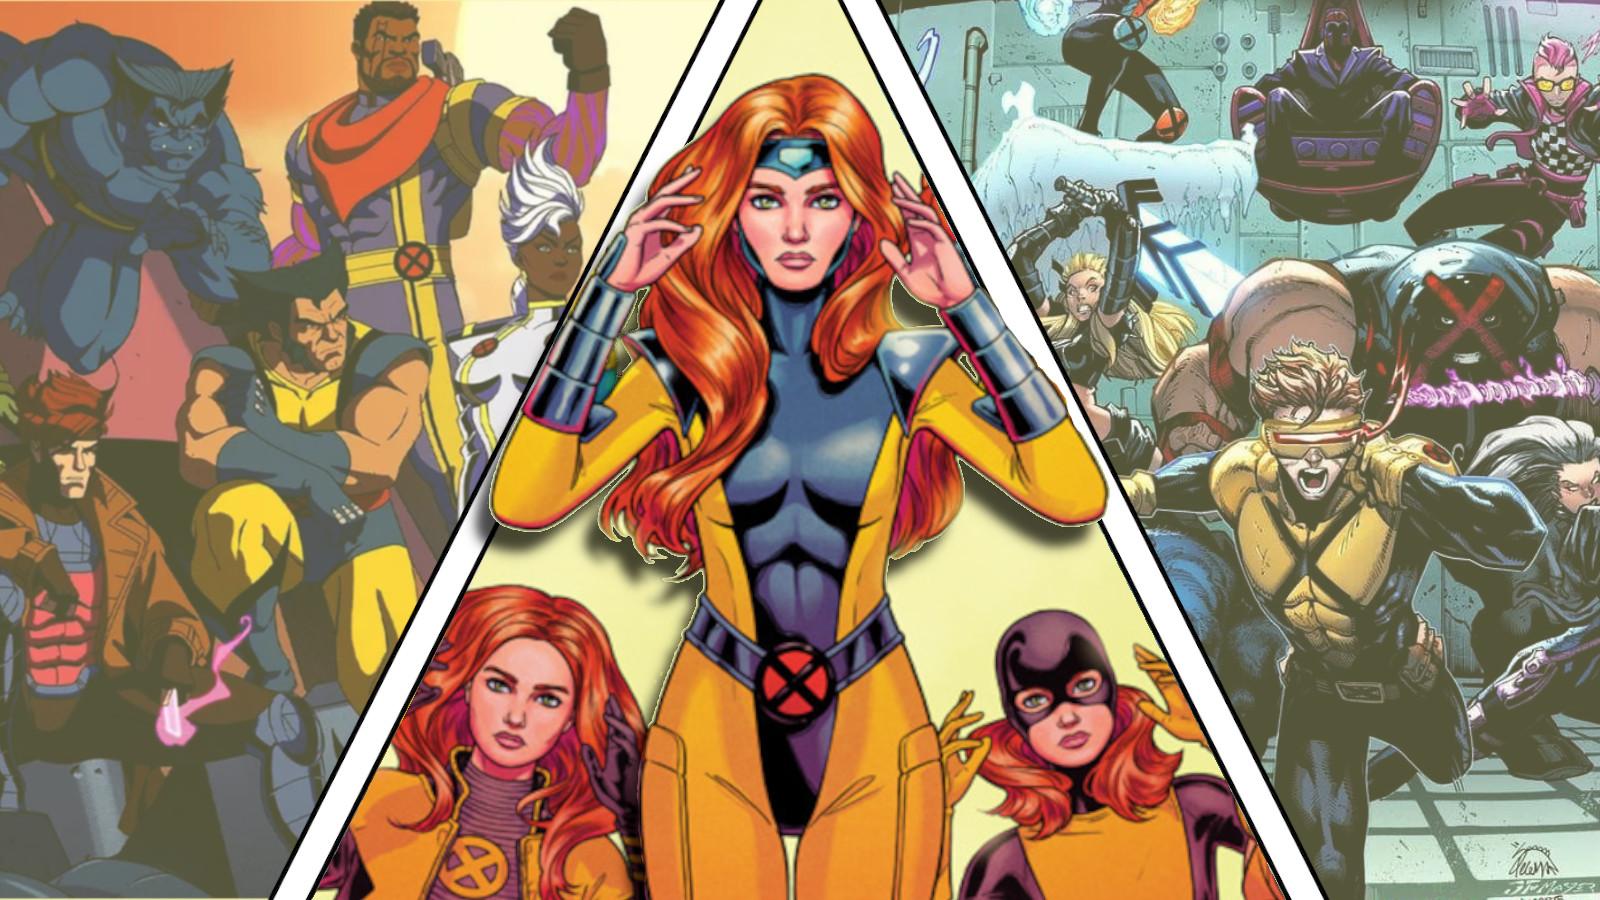 X-Men characters from Marvel Comics and X-Men '97